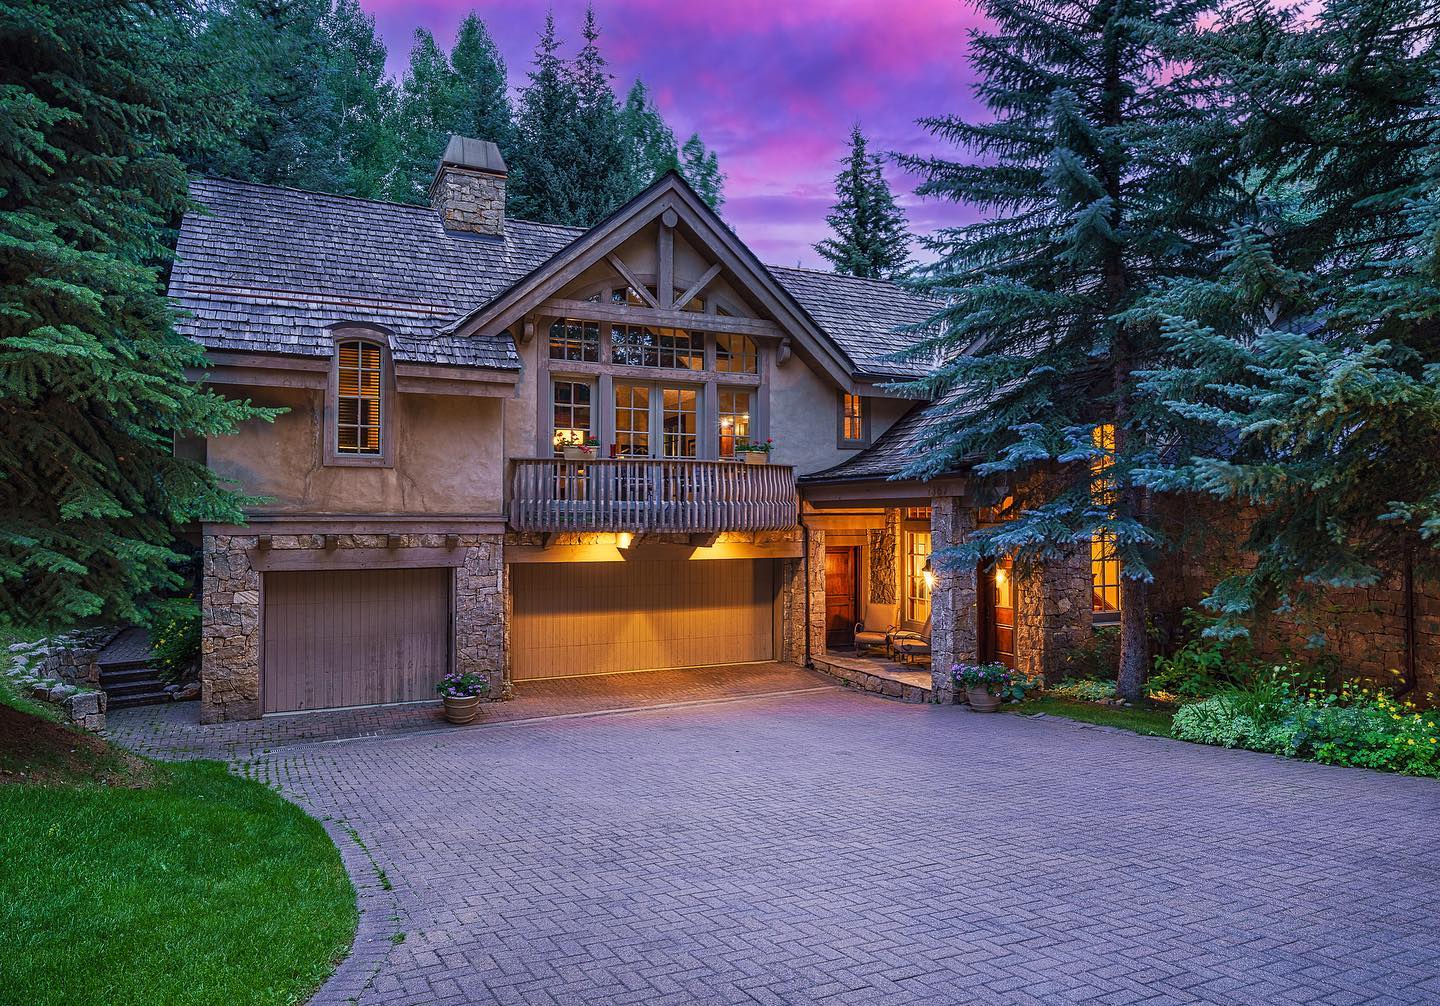 PENDING: Luxury Vail Valley Property